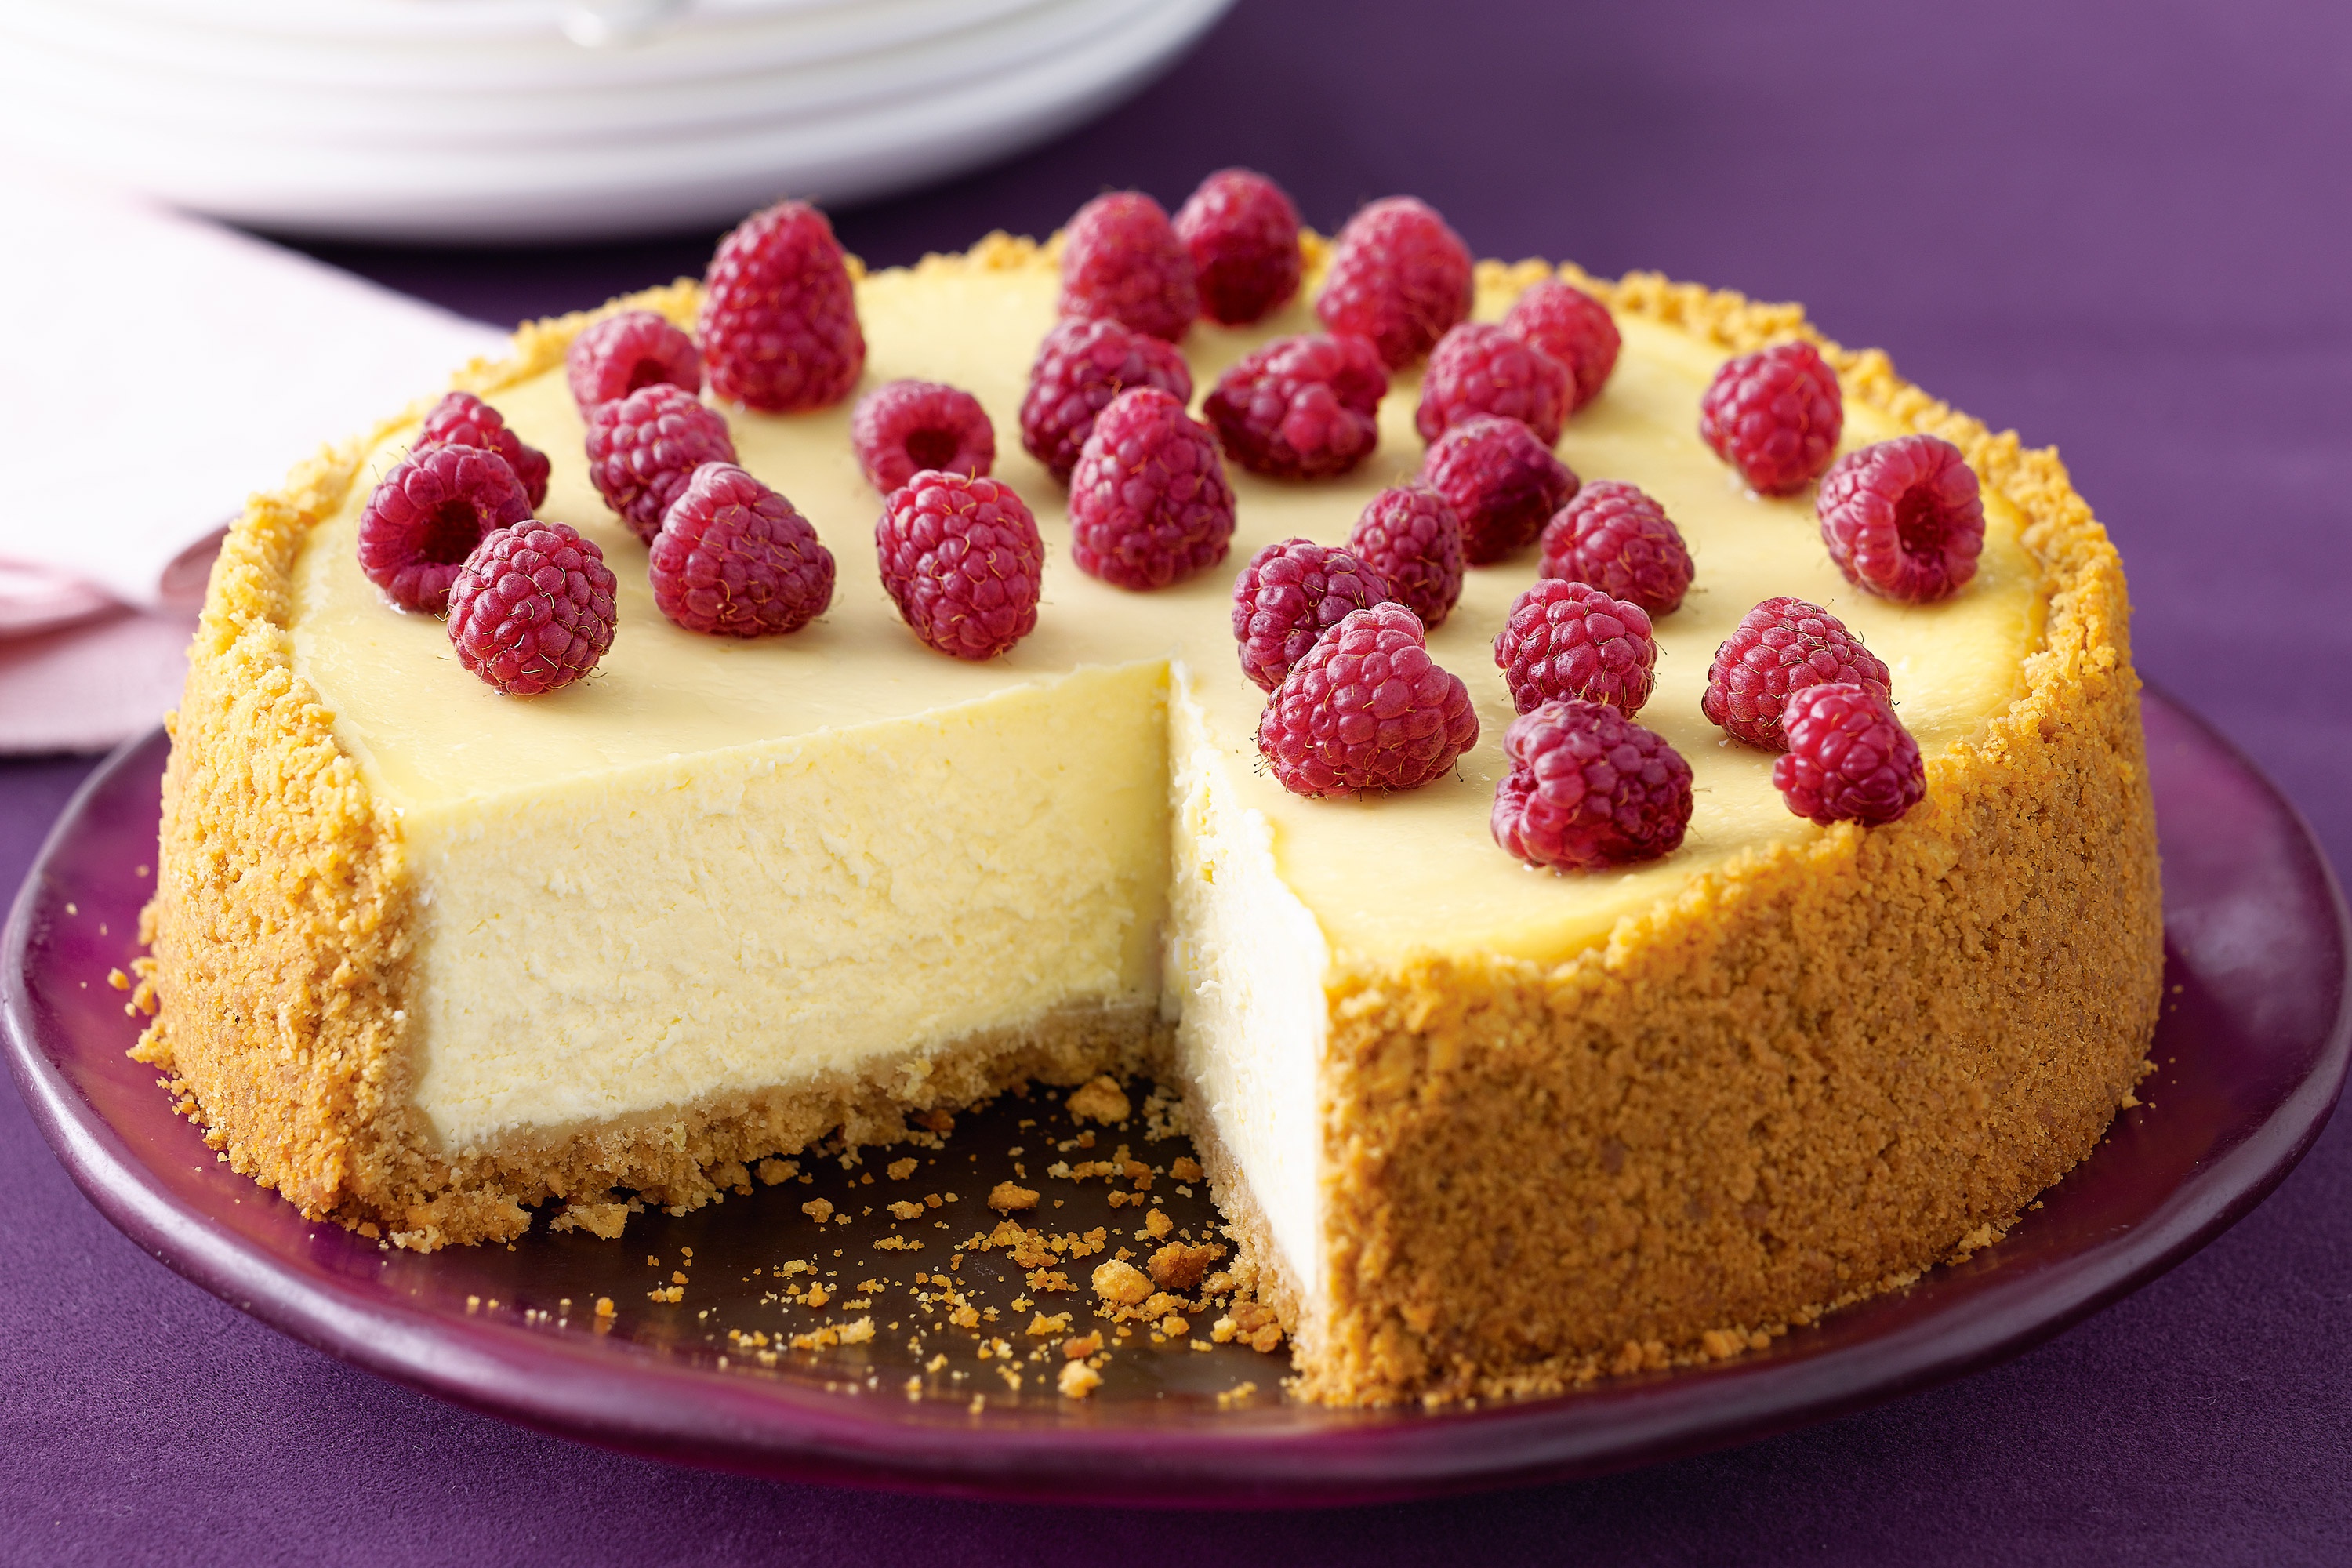 Download wallpaper raspberry, cake, cheesecake, section food in resolution ...